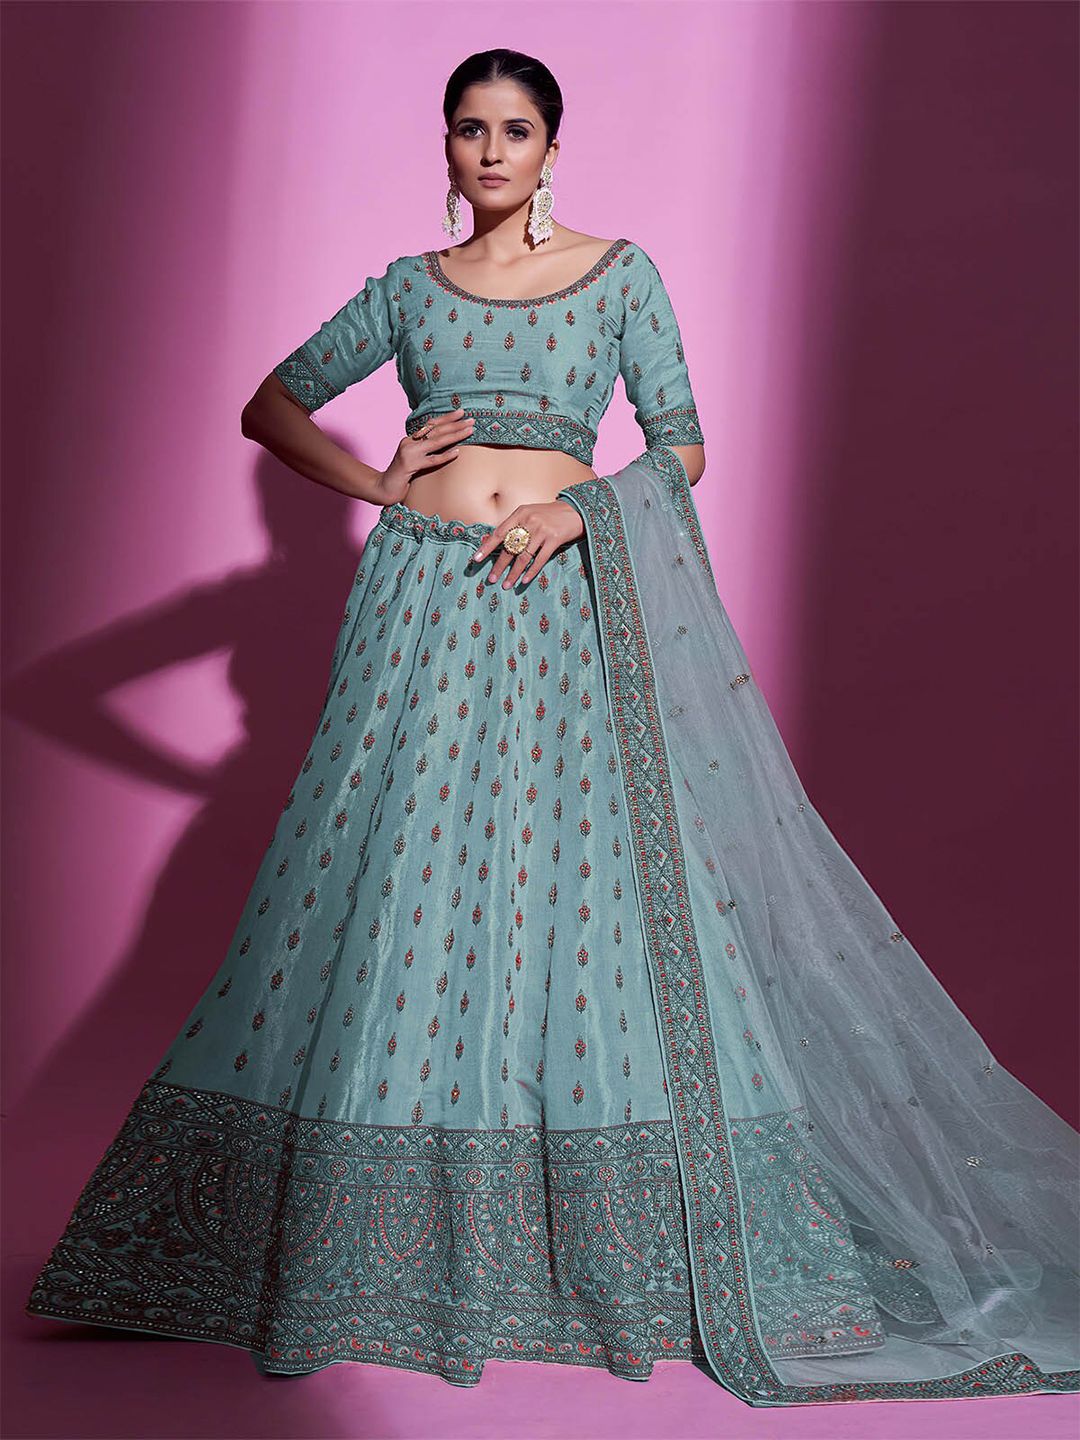 ODETTE Embroidered Beads & Stones Semi-Stitched Lehenga With Unstitched Blouse & Dupatta Price in India